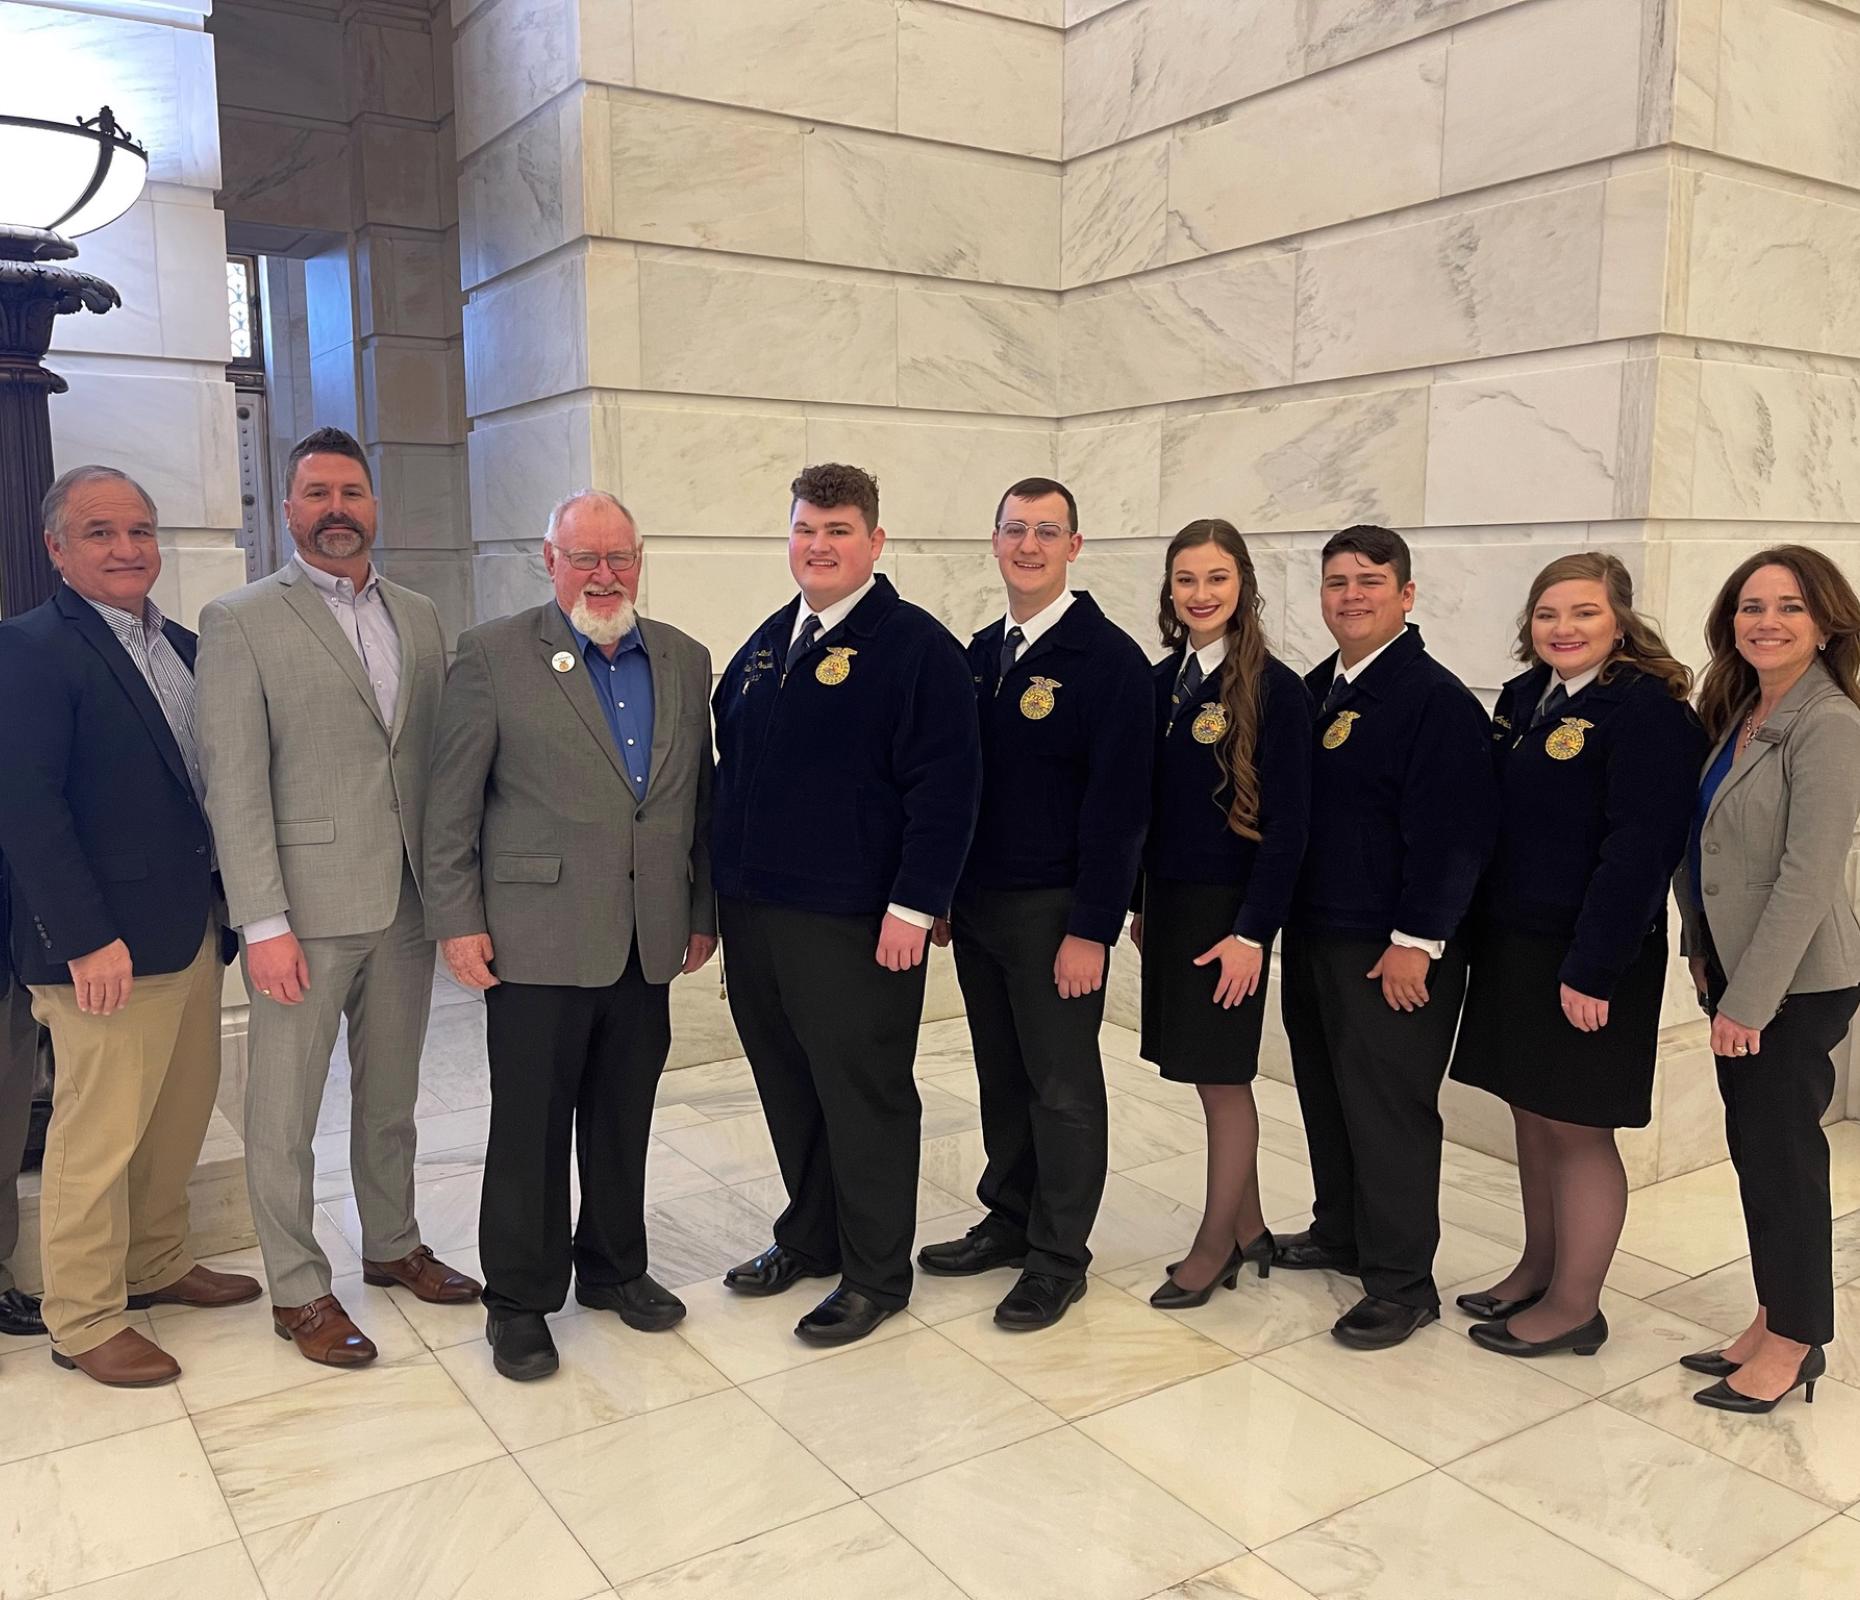 6 people standing in front of a white marble wall at the AR State Capitol. Four on the right are wearing official FFA jackets and photo recognizes Farm Credit's $50,000 donation to updating Camp Couchdale.